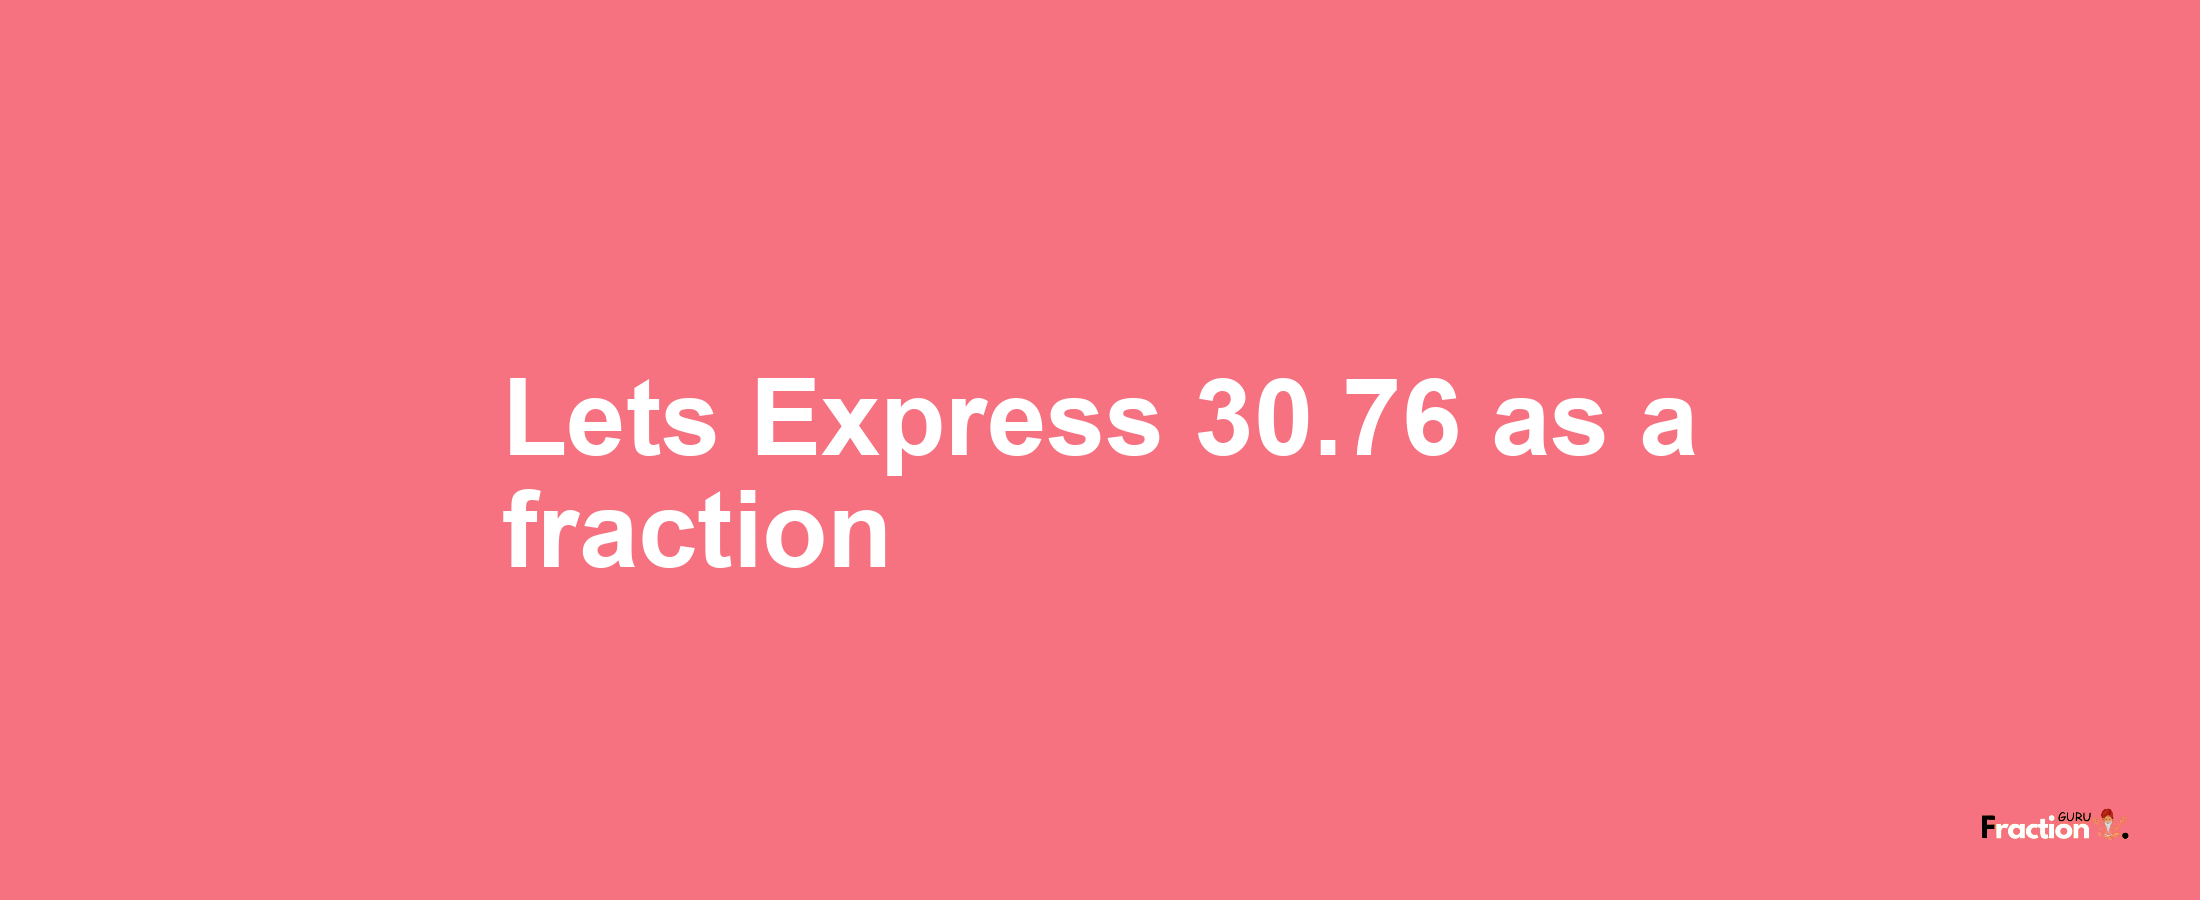 Lets Express 30.76 as afraction